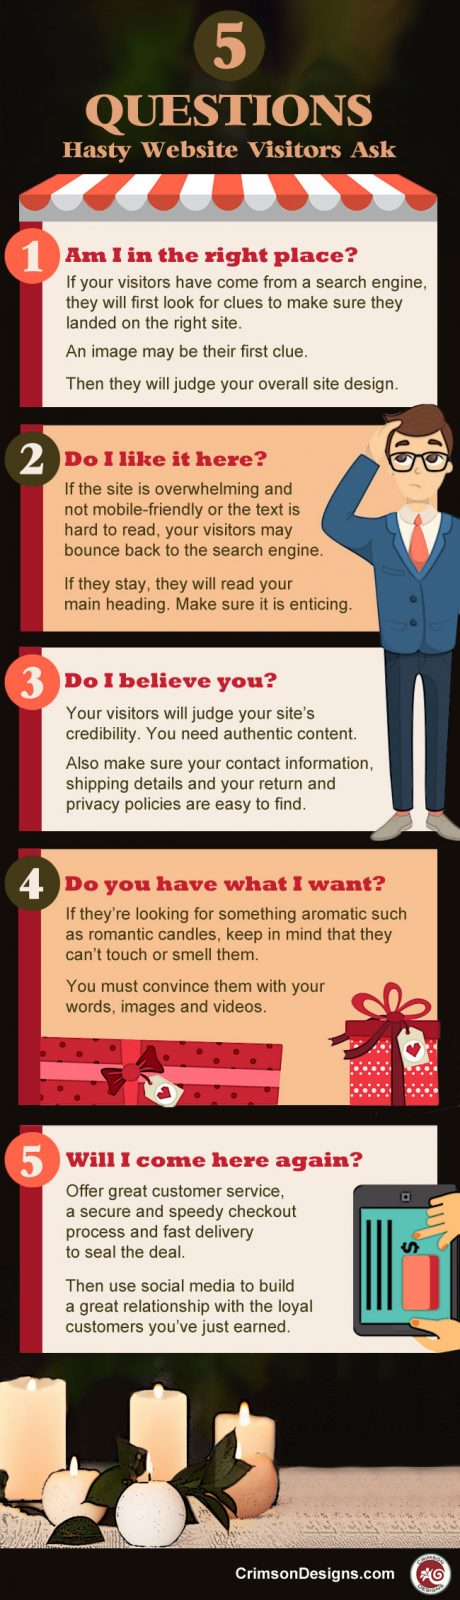 5 Questions Hasty Website Visitors Ask - Infographic